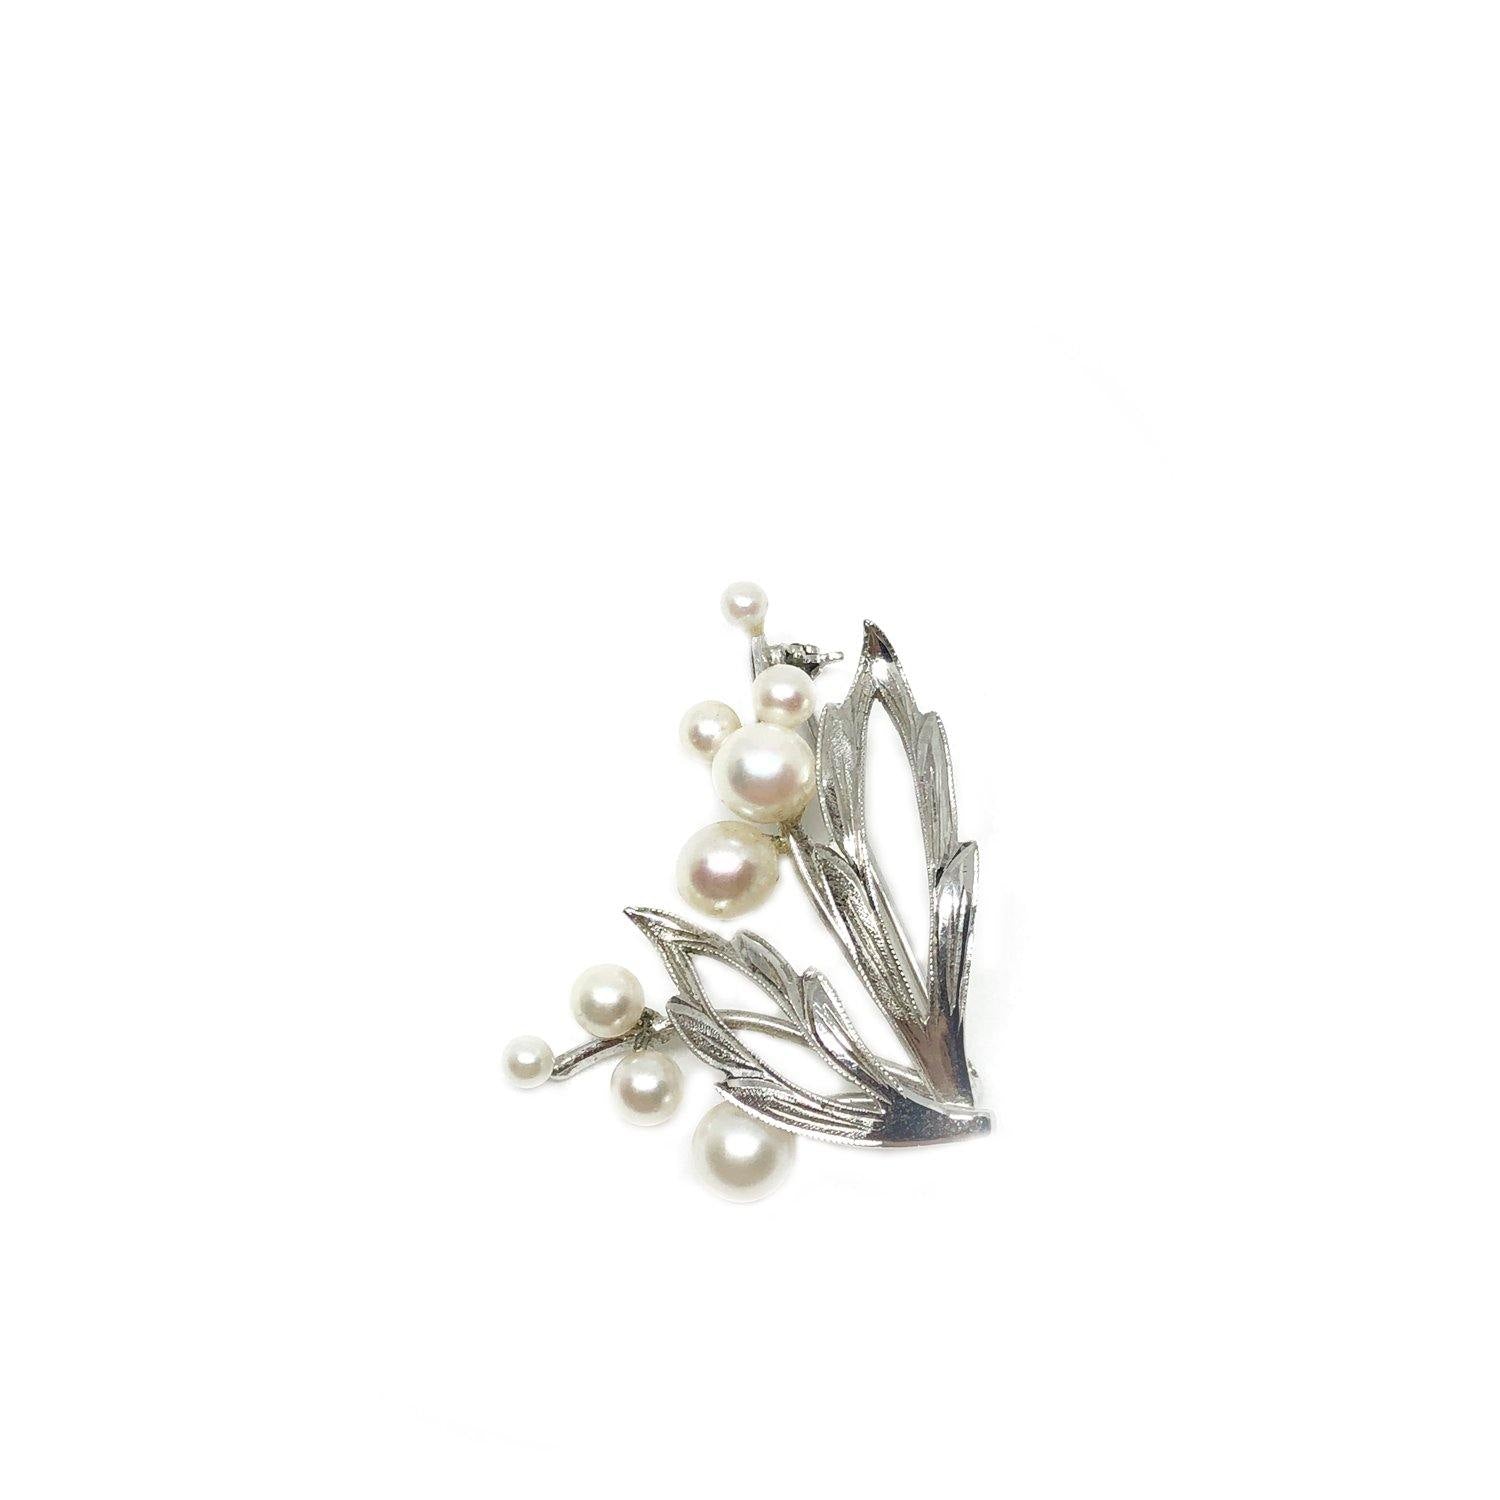 Front Nouveau Floral Branch Japanese Akoya Cultured Saltwater Pearl Brooch- Sterling Silver